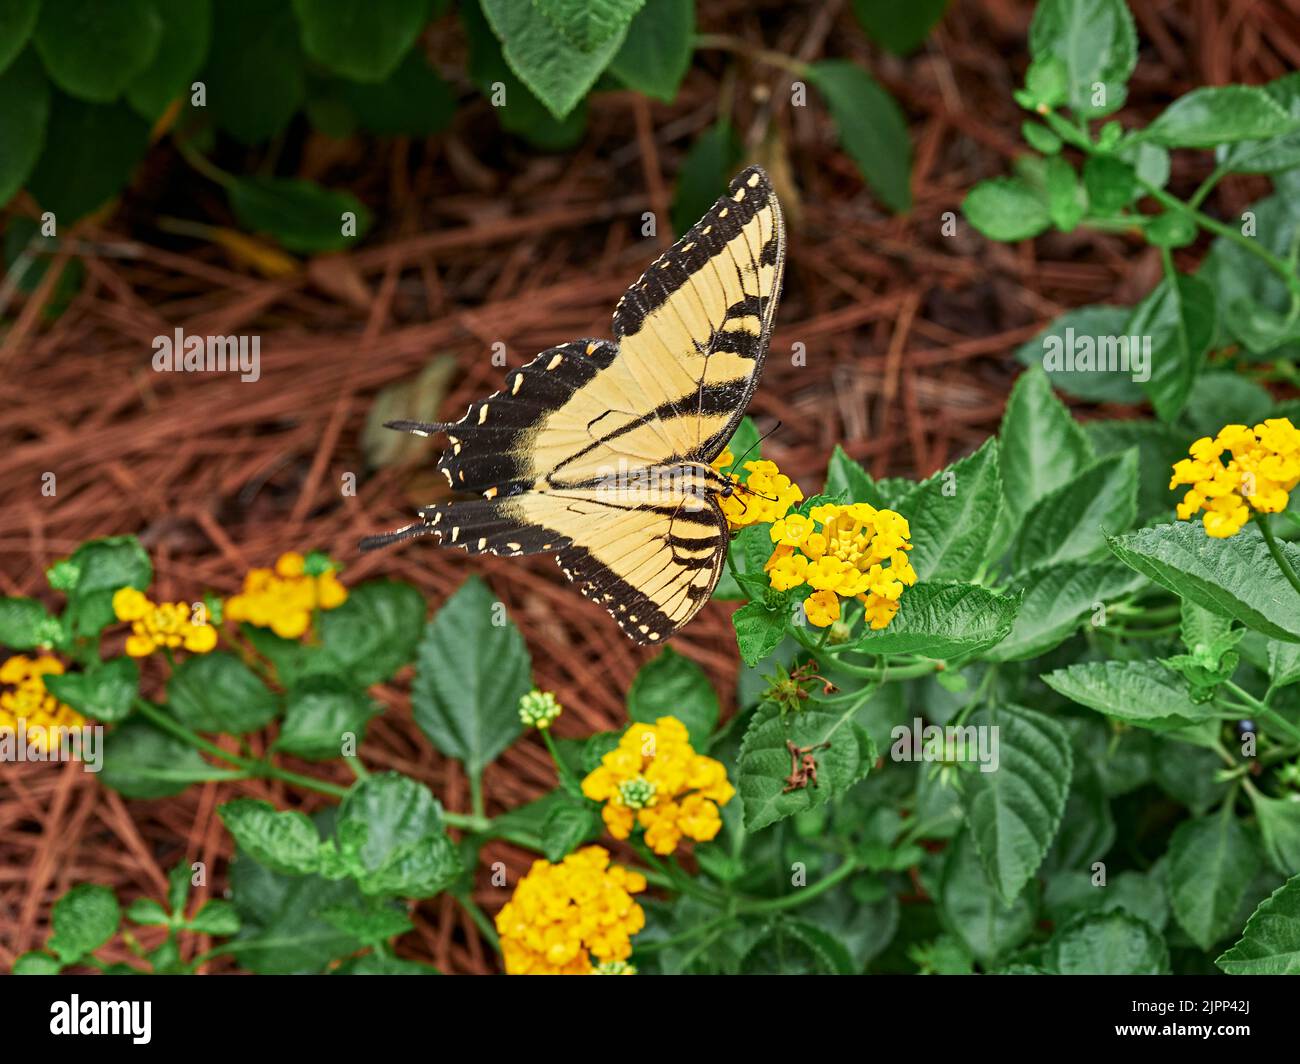 Eastern tiger swallowtail (Pterourus glaucus), yellow and black, butterfly on a lantana flower gathering nectar in central Alabama, USA. Stock Photo